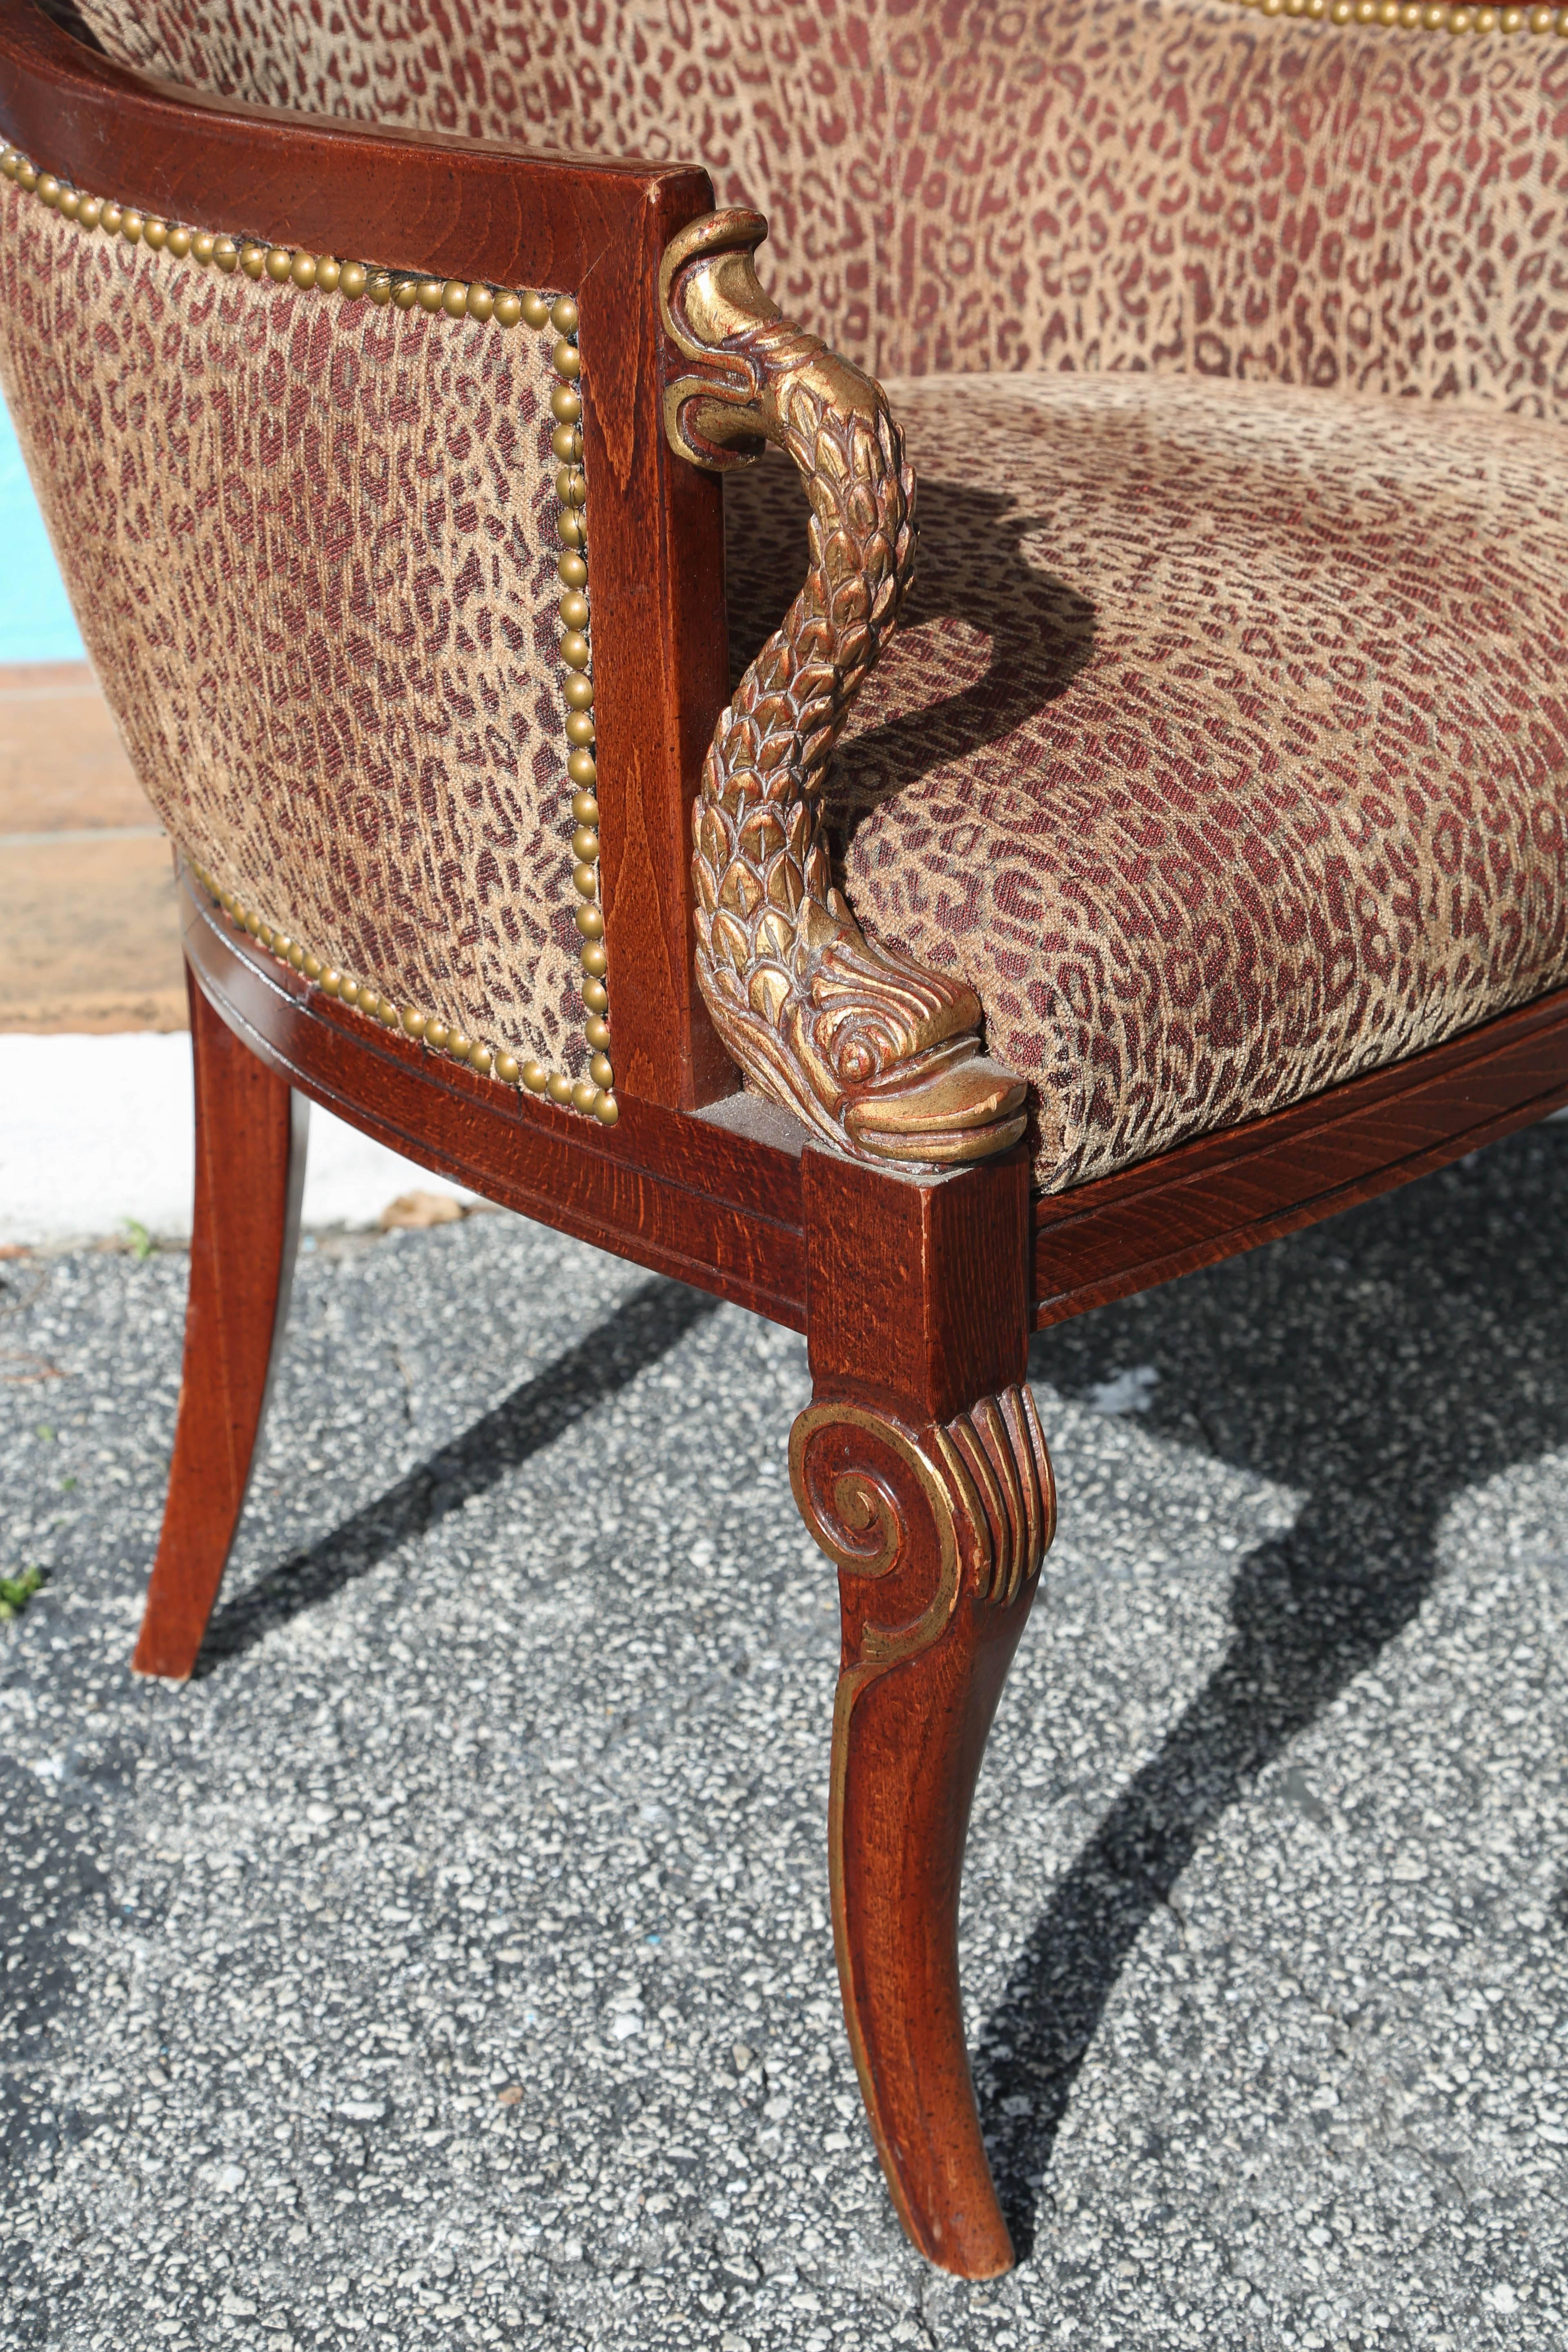 A wonderful pair appointed with giltwood dolphin motif arm rests and covered with stunning baby leopard print fabric outlined with nailheads.